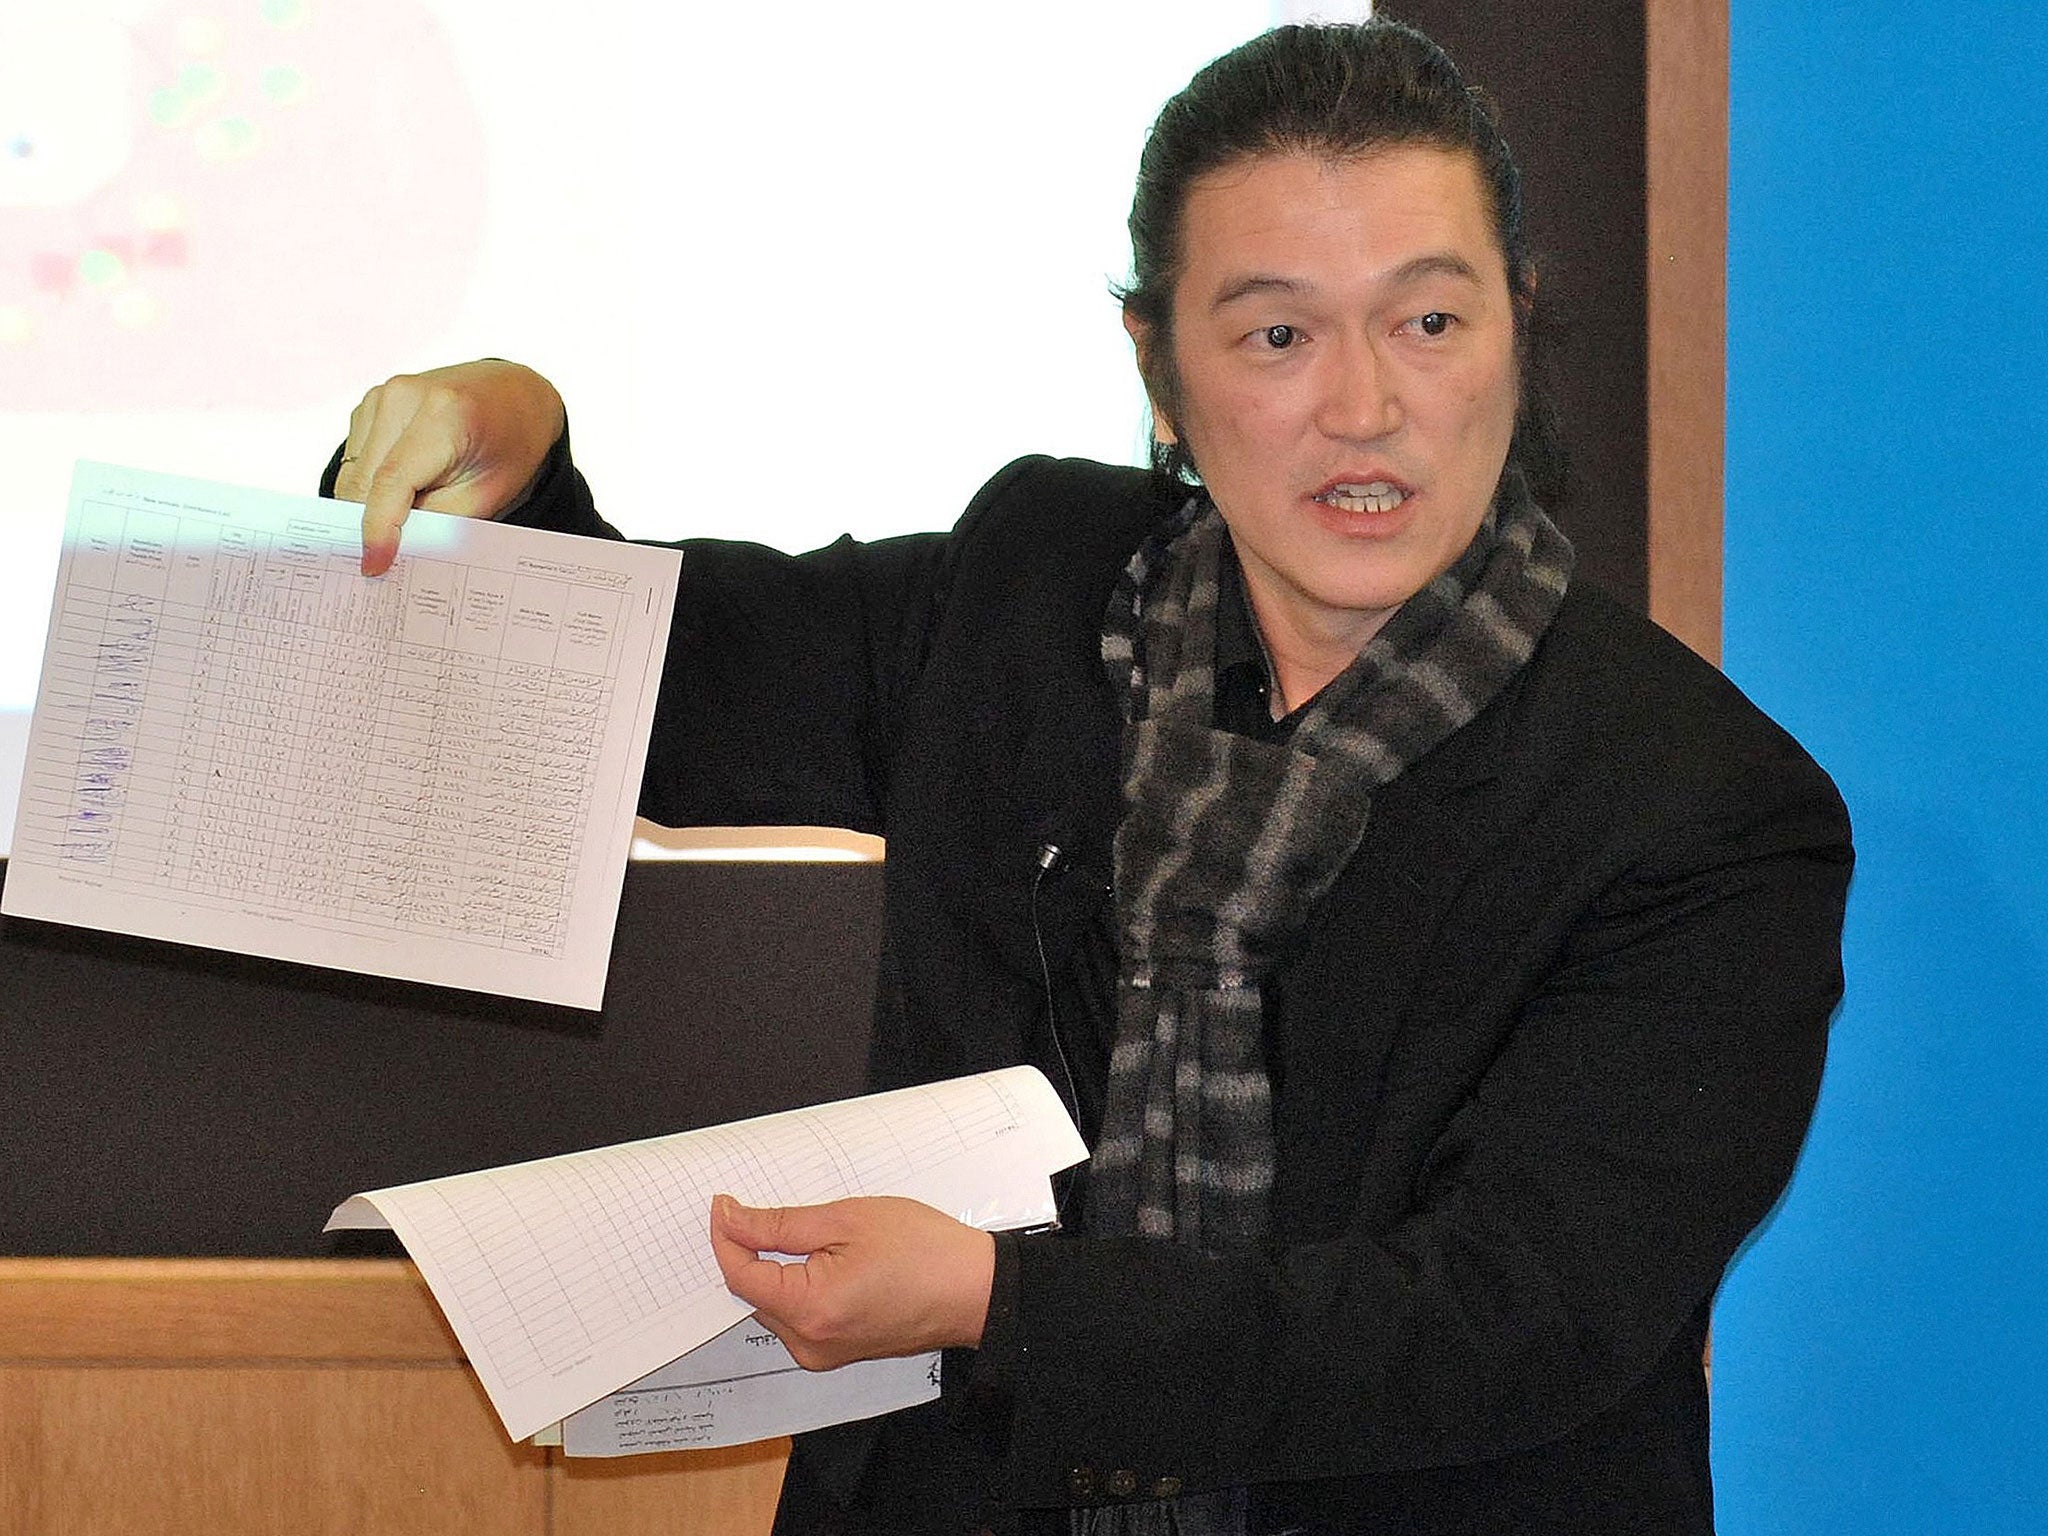 Japanese journalist Kenji Goto speaking about the Middle East at a public event in Tokyo